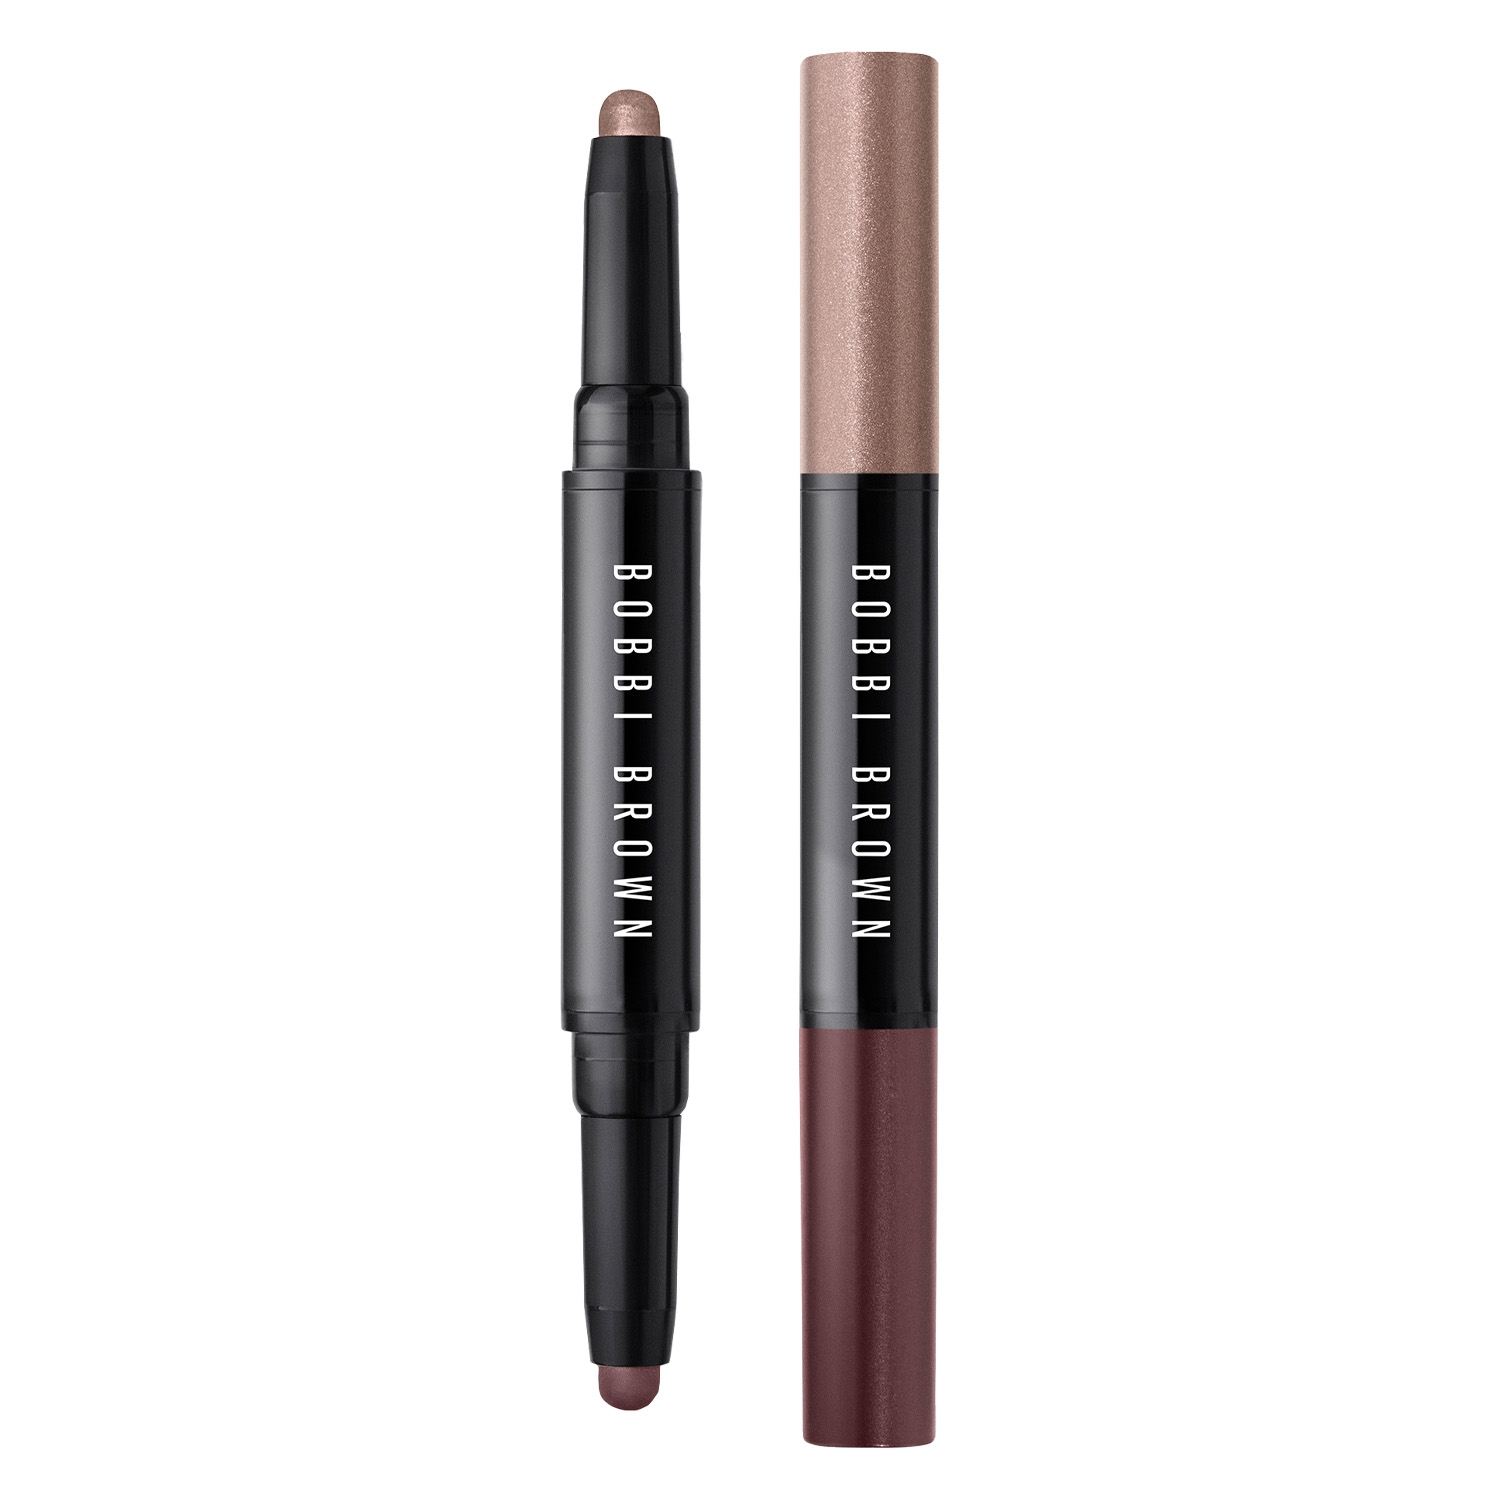 Product image from BB Eye Shadow - Long-Wear Cream Shadow Stick Duos Pink Steel/ Bark